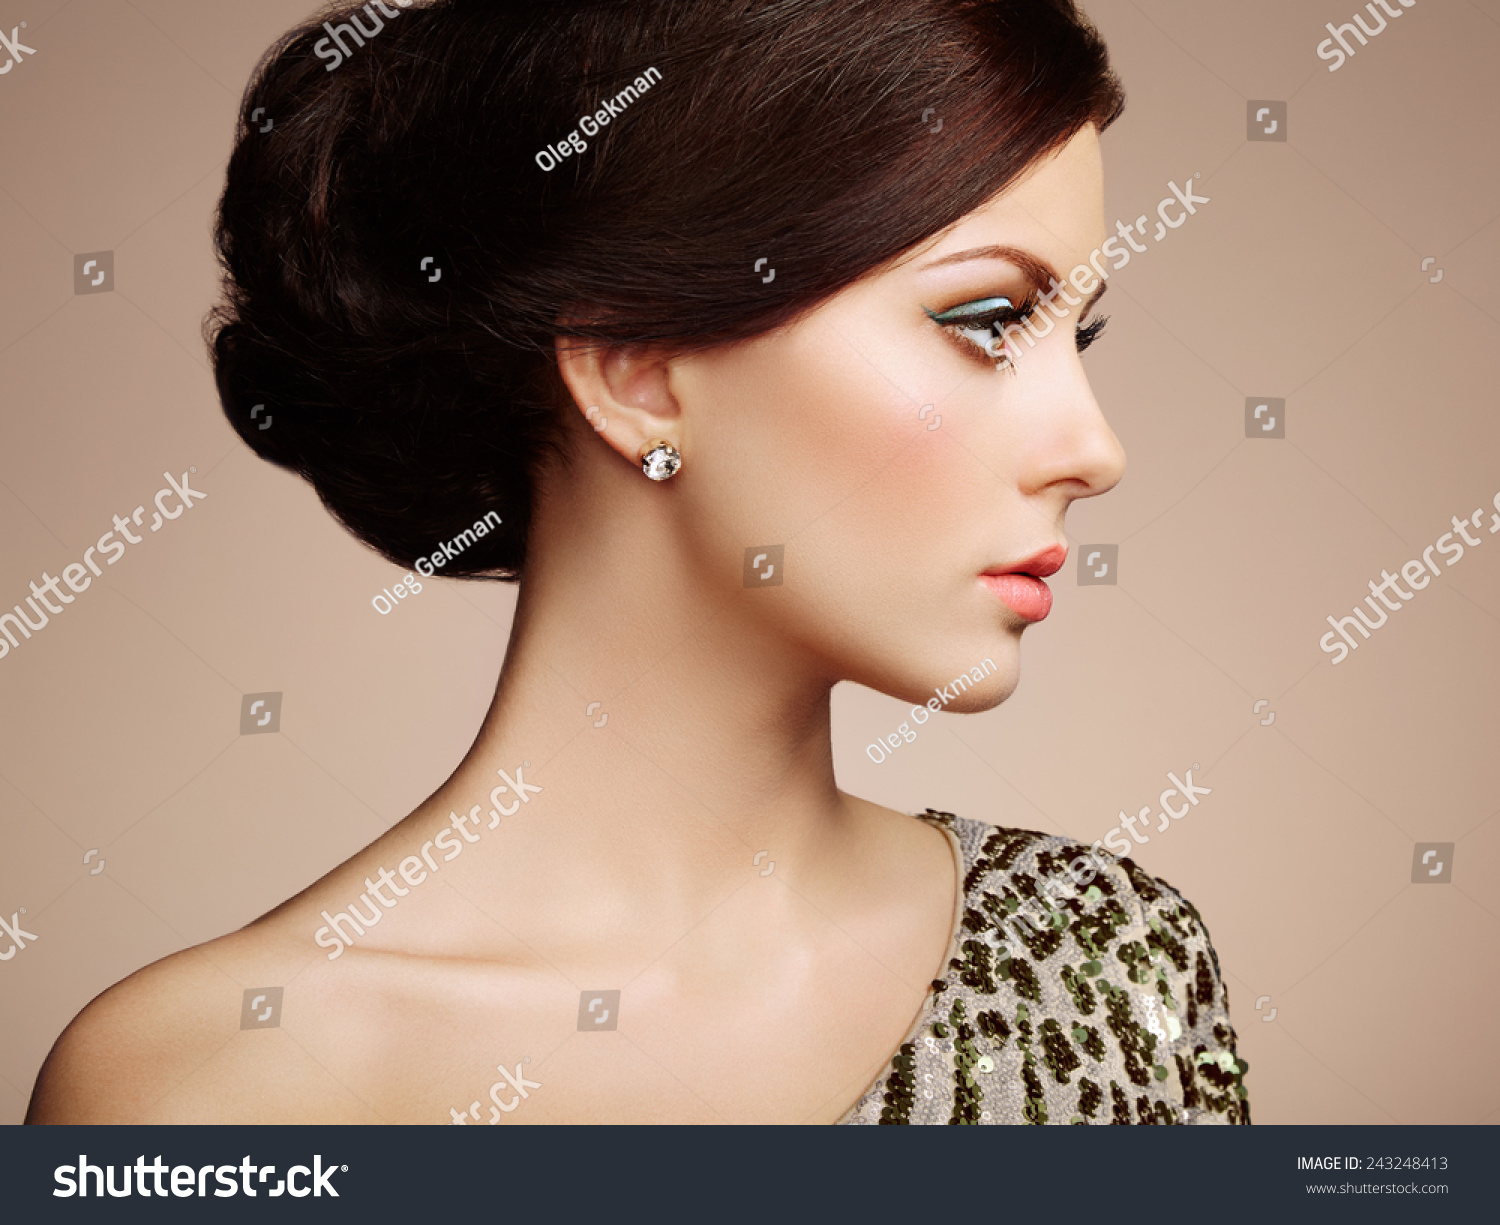 Fashion portrait of elegant woman with magnificent hair. Blonde girl. Perfect make-up #243248413